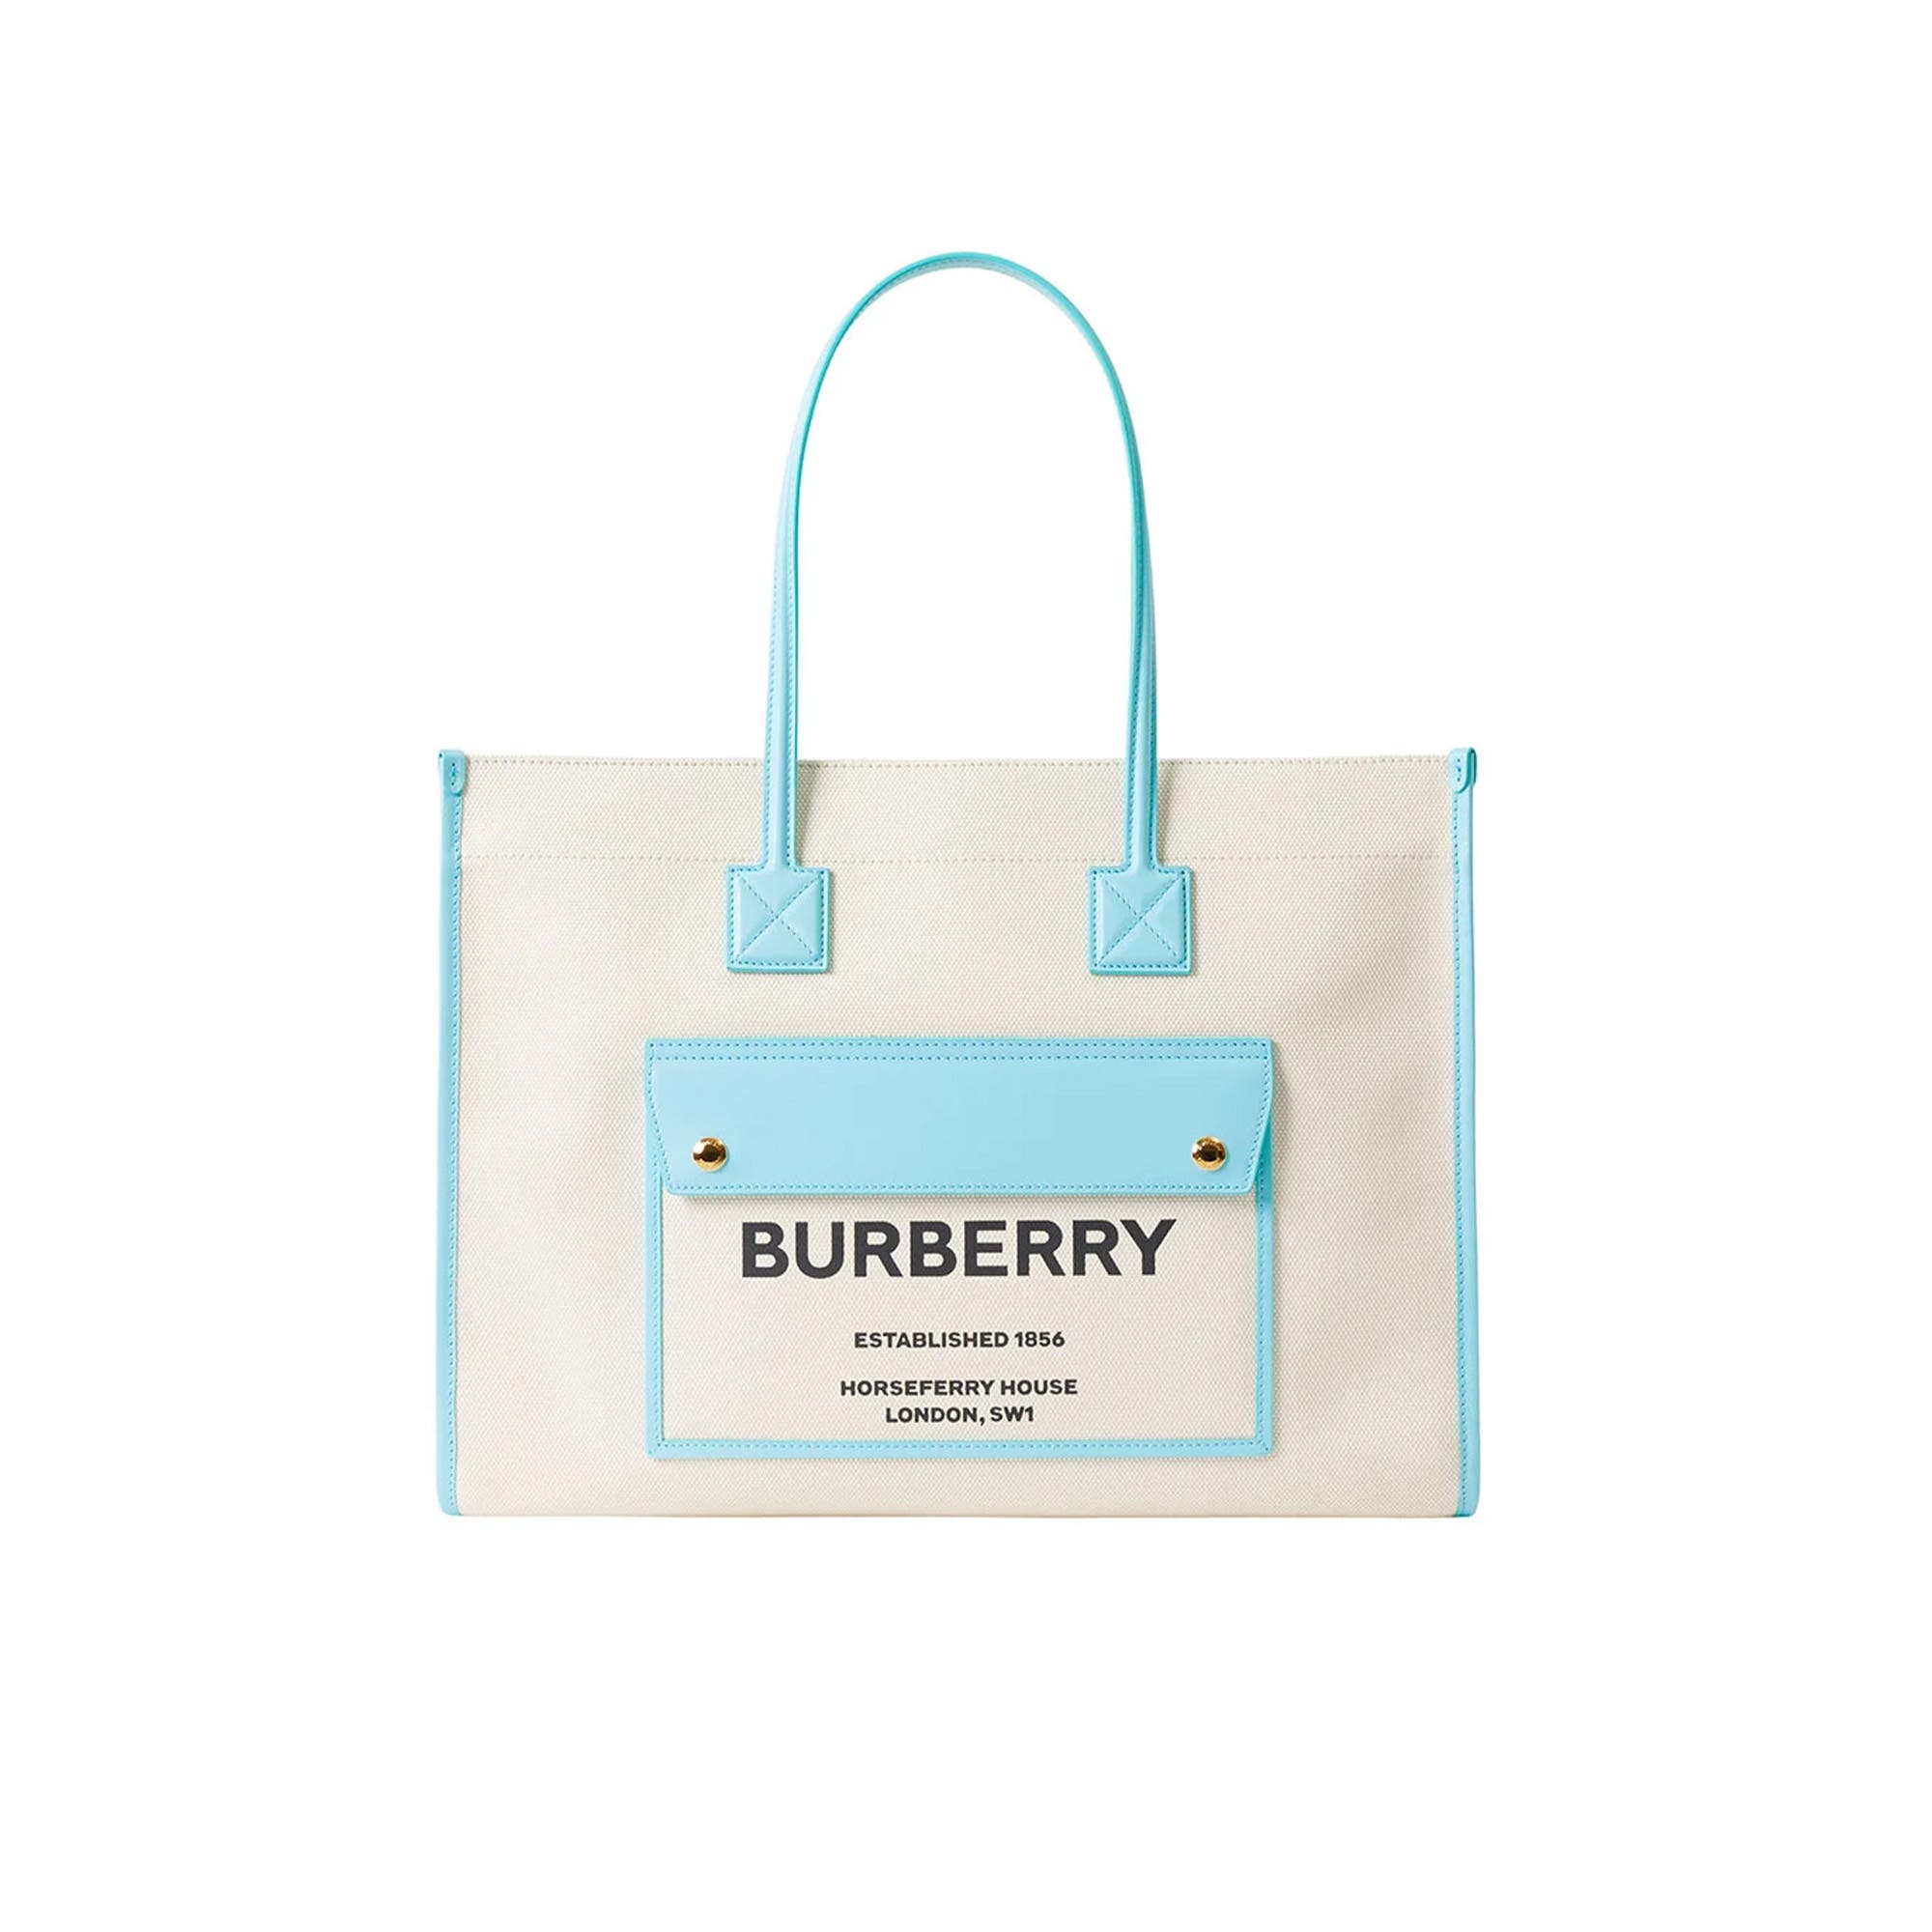 Burberry Bags for Women - Vestiaire Collective